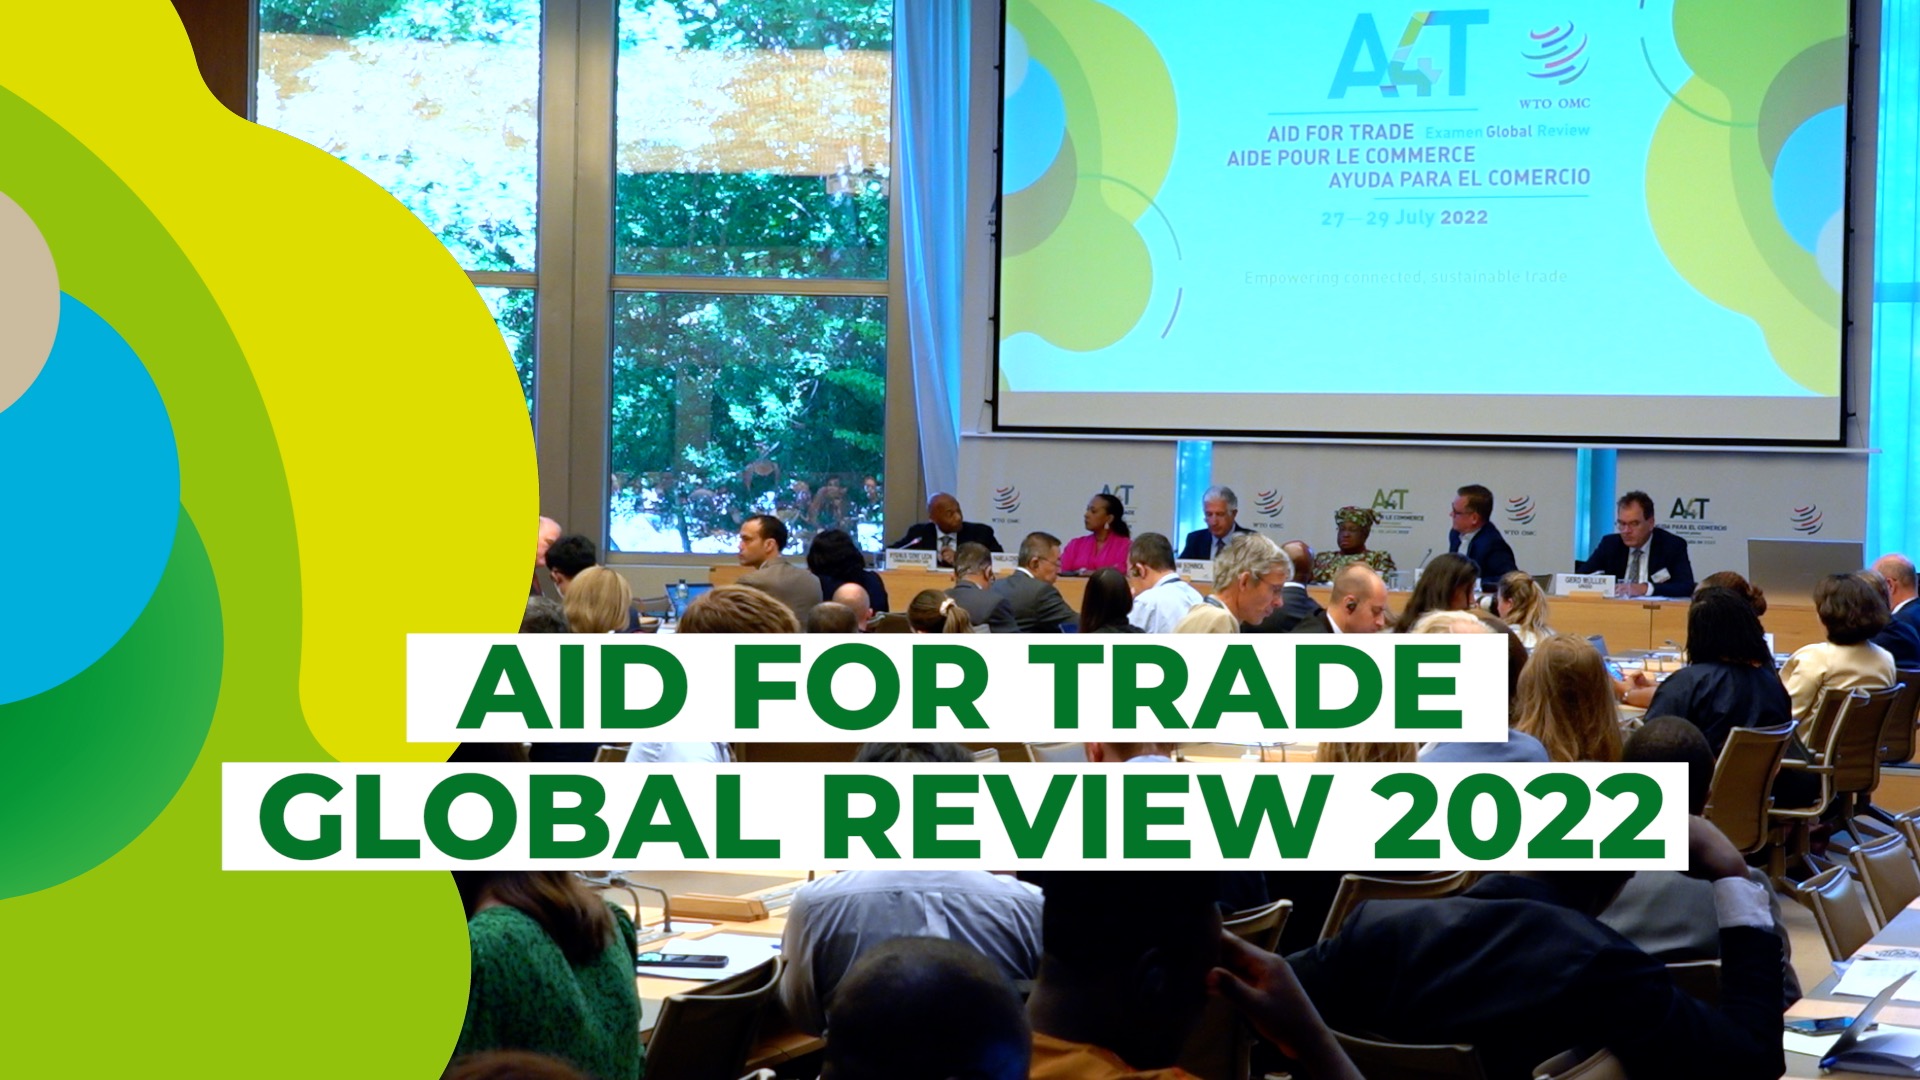 Global Gateway: EU holds its rank as top provider of ‘aid for trade’ in Africa and globally